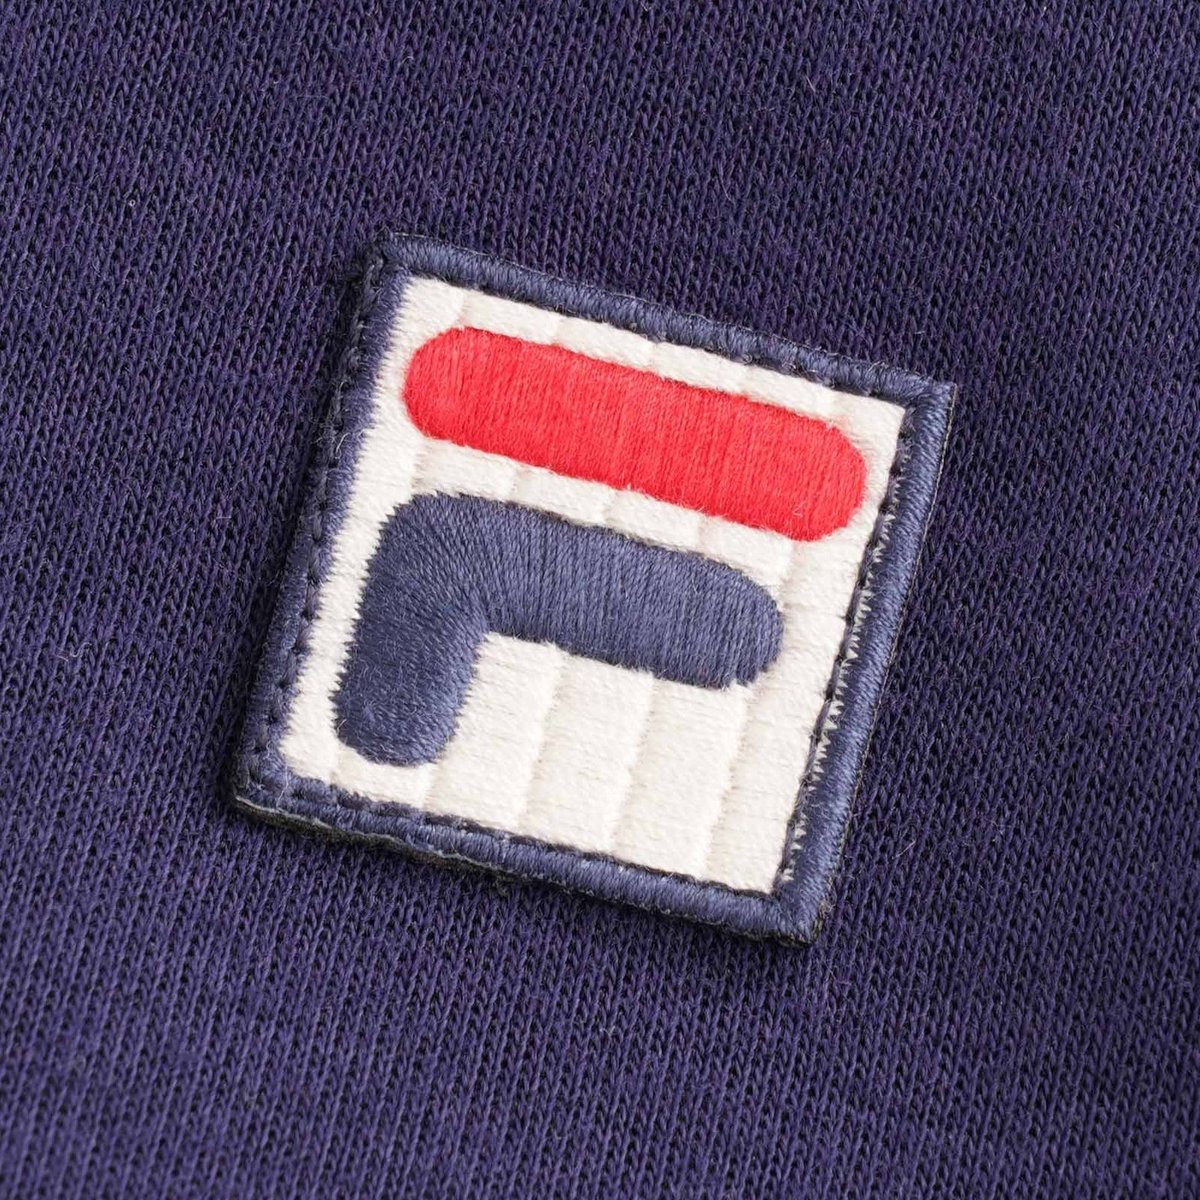 Ad : Fila Vintage Reductions - Now Up to 50% OFF T-Shirts from just £13 Polos from £20 Hoodie was £60 , Now £29.34 Online here🔗tinyurl.com/bdzcfsya *Ltd sizes/stock on some items